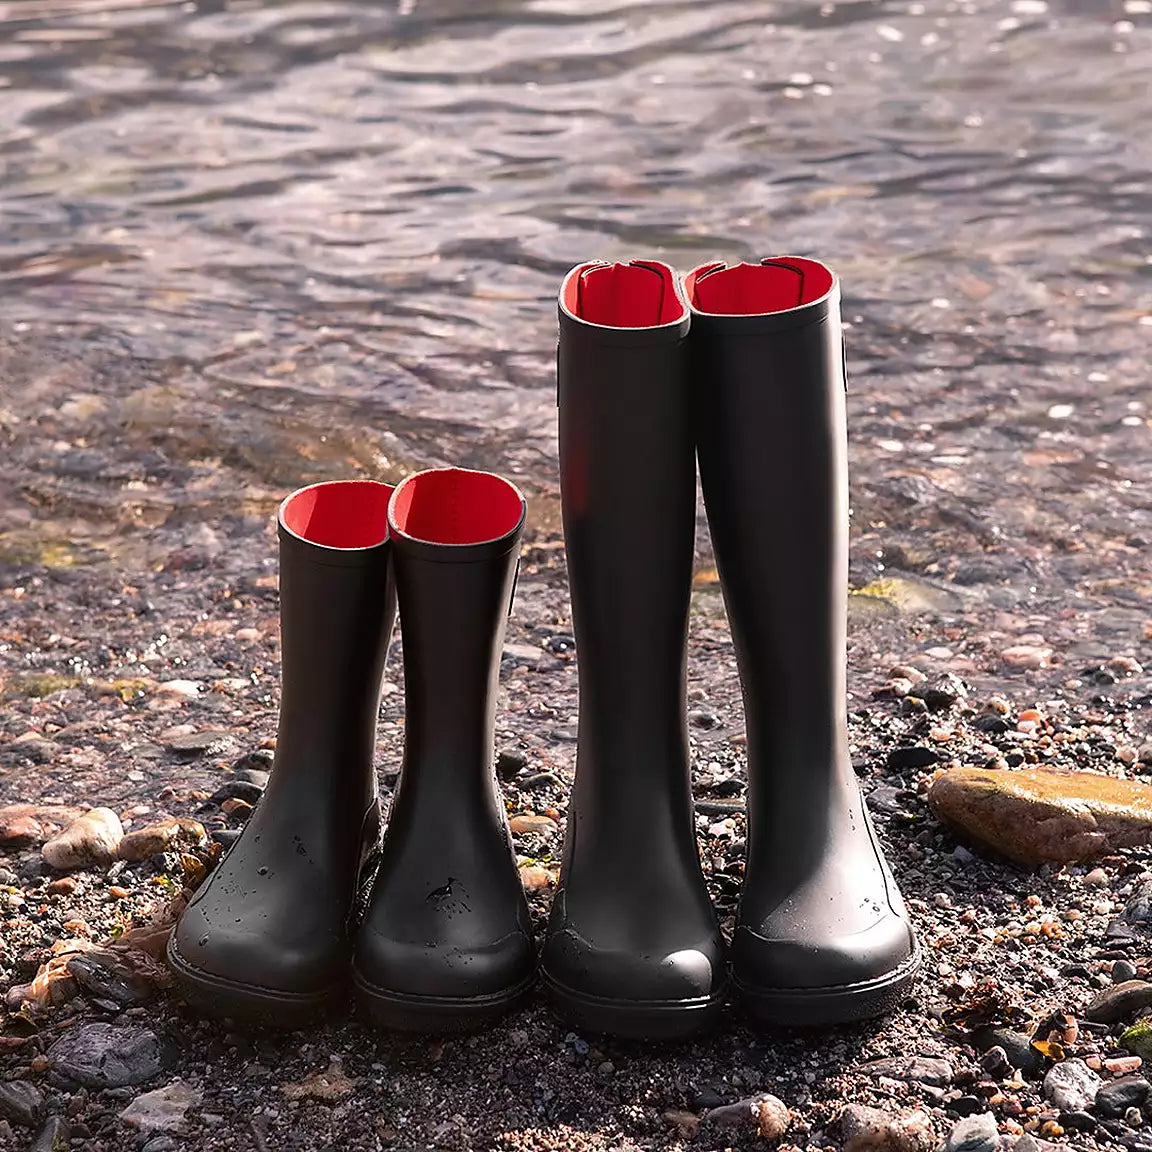 FitFlop FitFlop WONDERWELLY Short Wellington Boots    